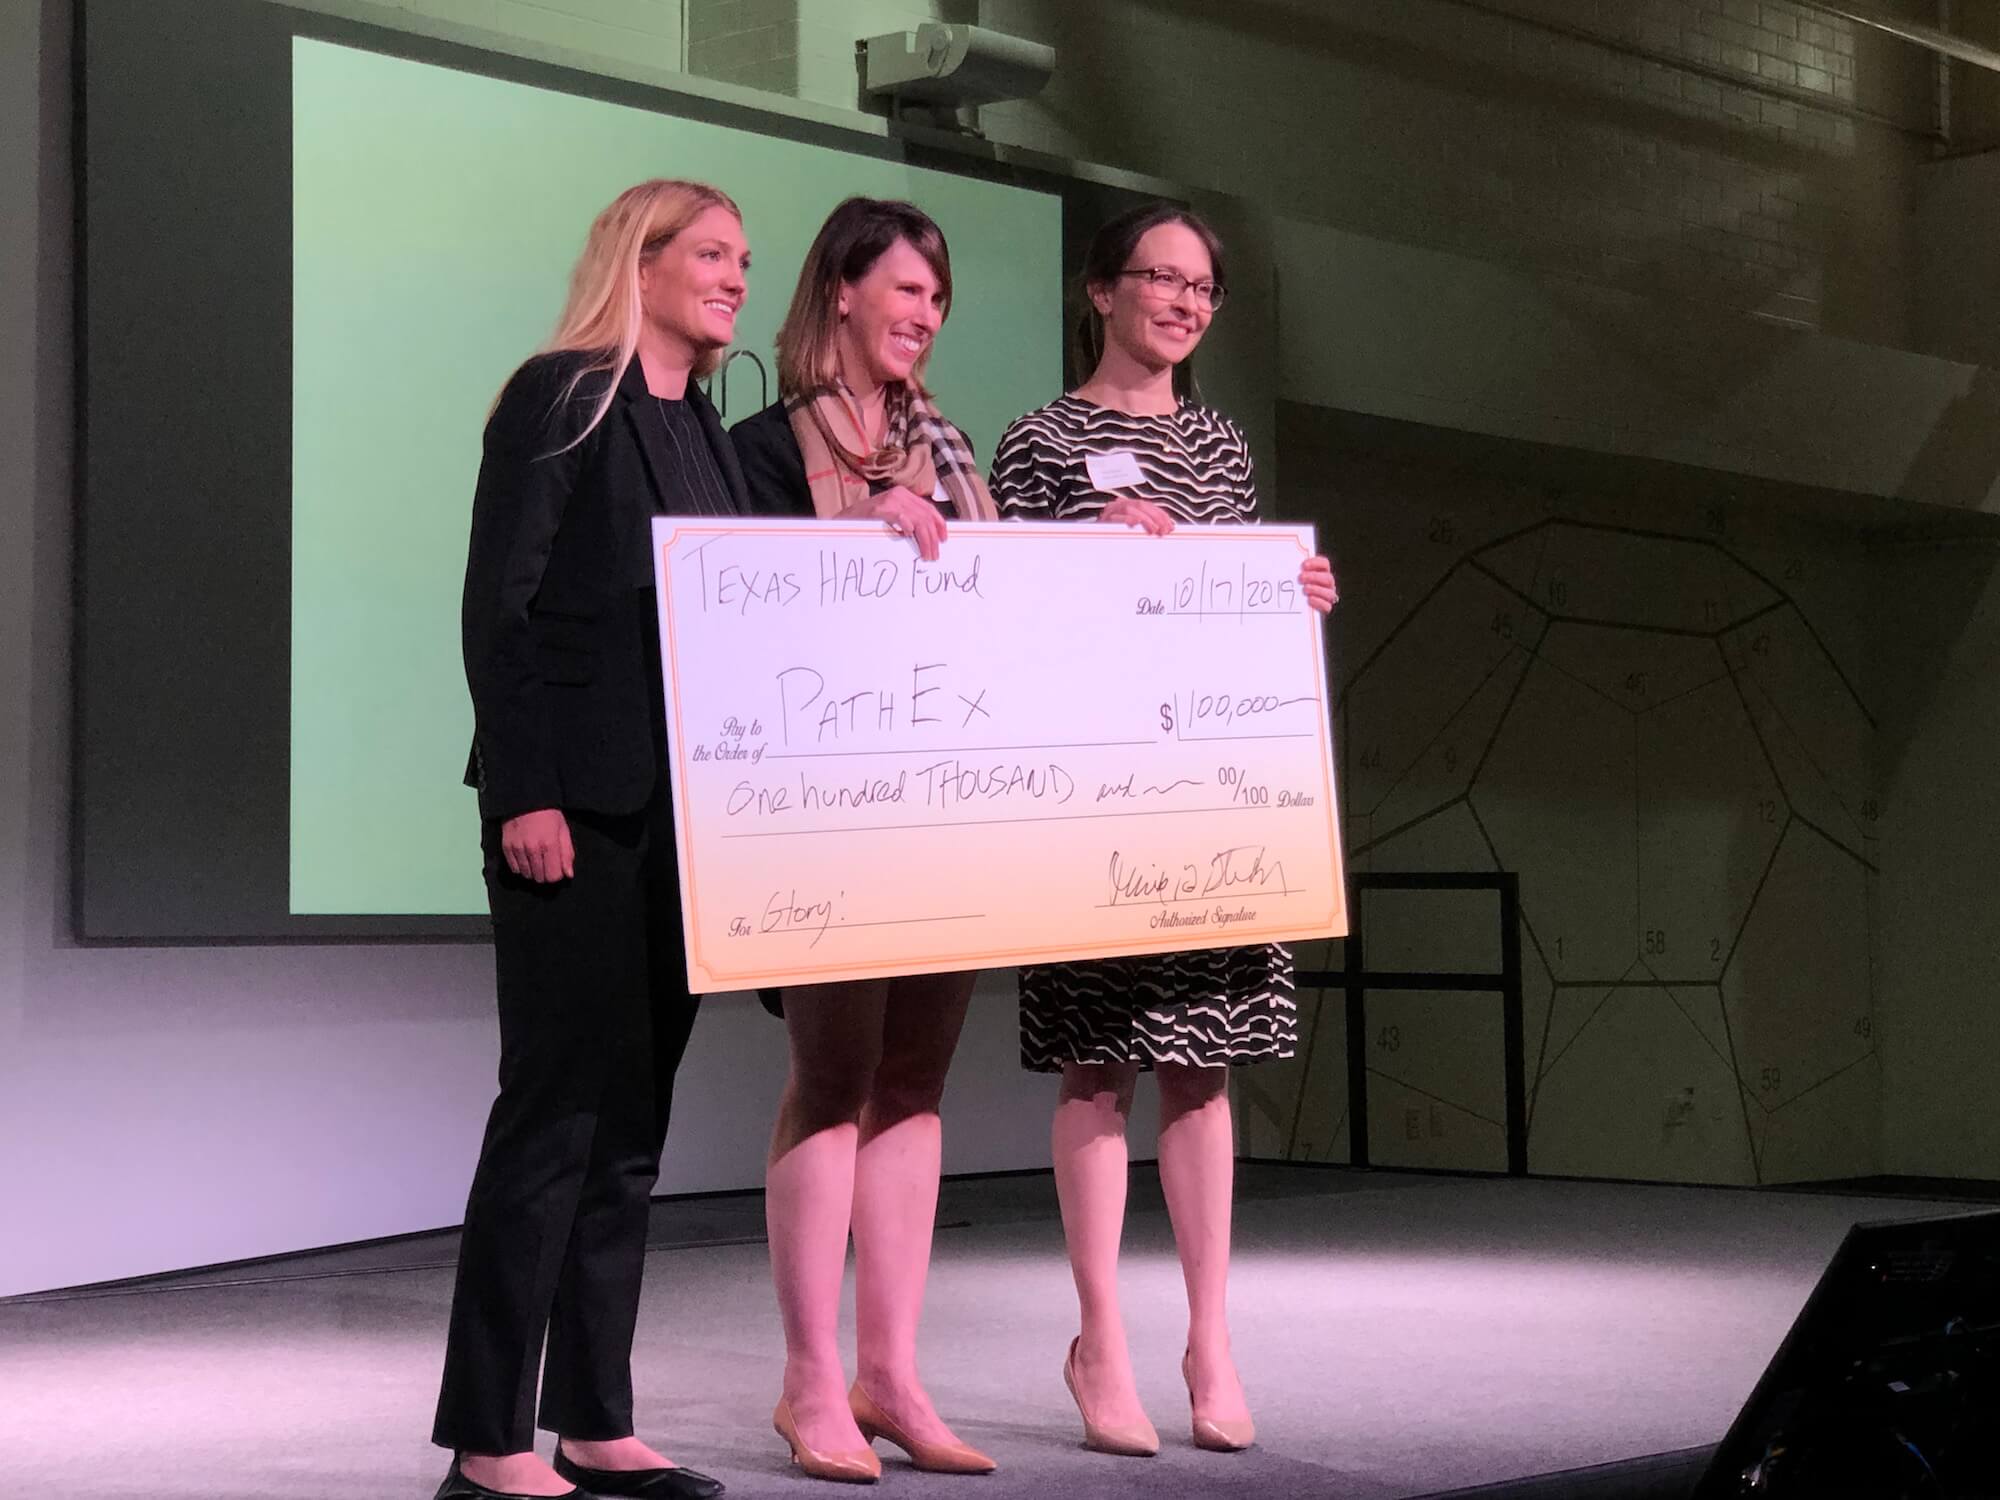 Sinead Miller, Ph.D., co-founder and CEO of PathEx (left) receives a $100,000 check from the Texas Halo Fund.